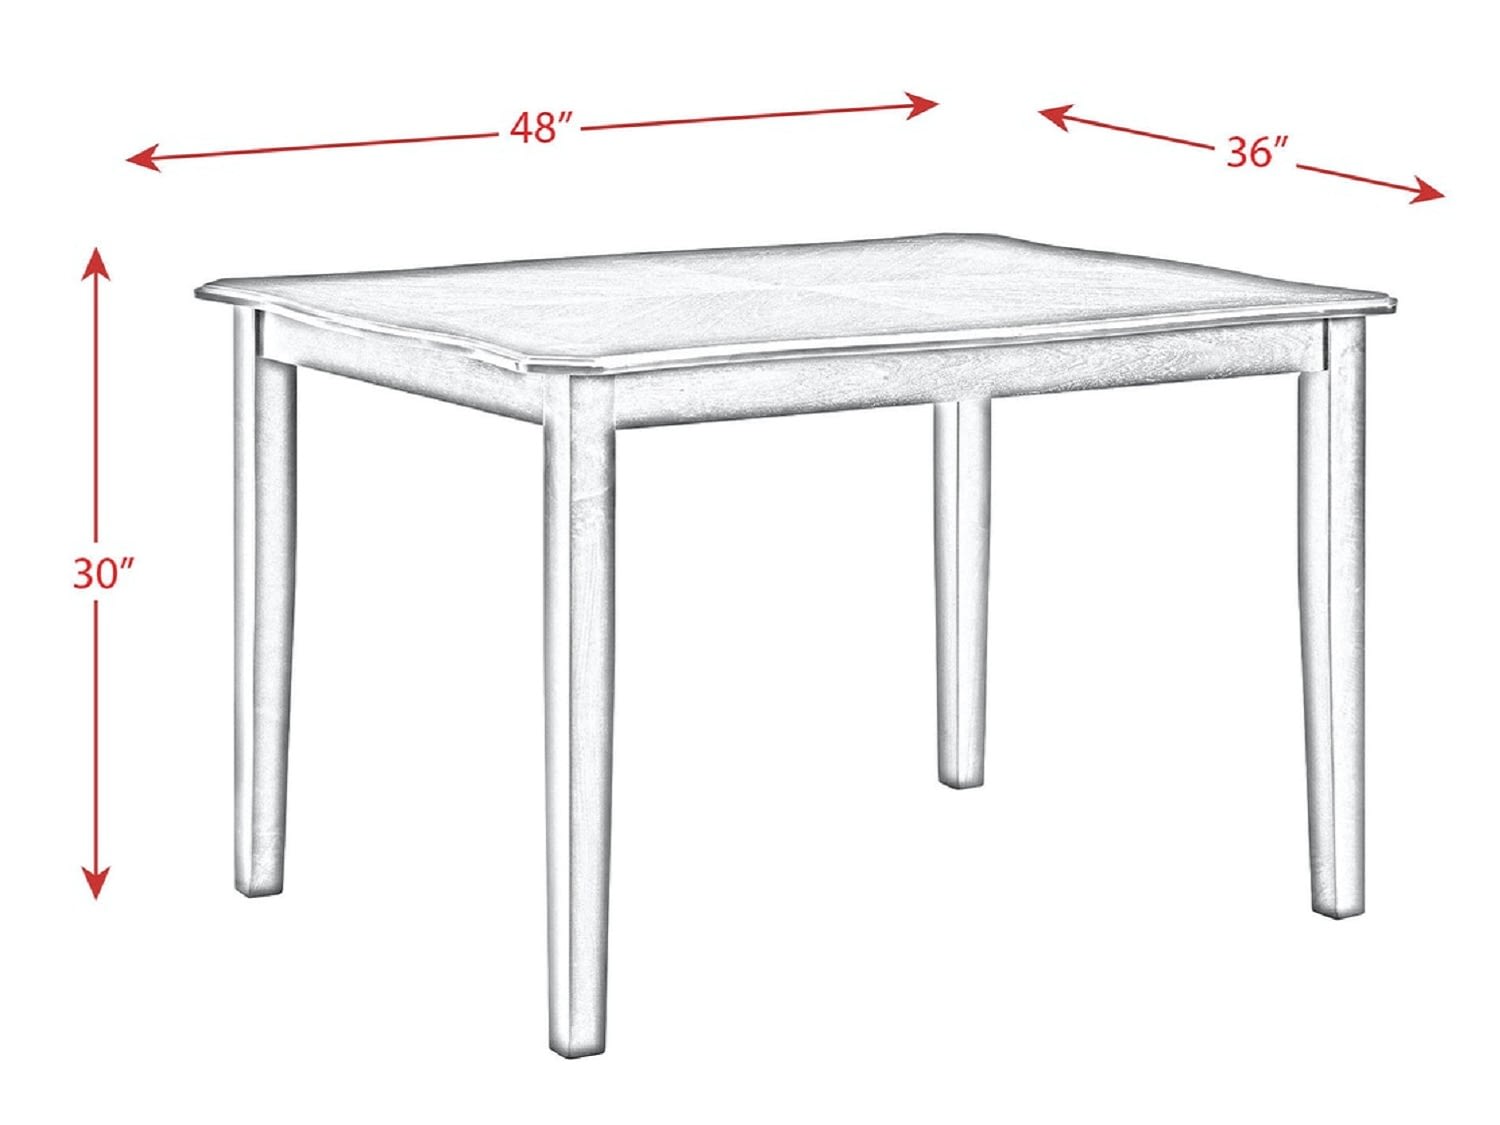 EUSTICE Dining Table - Dimensions